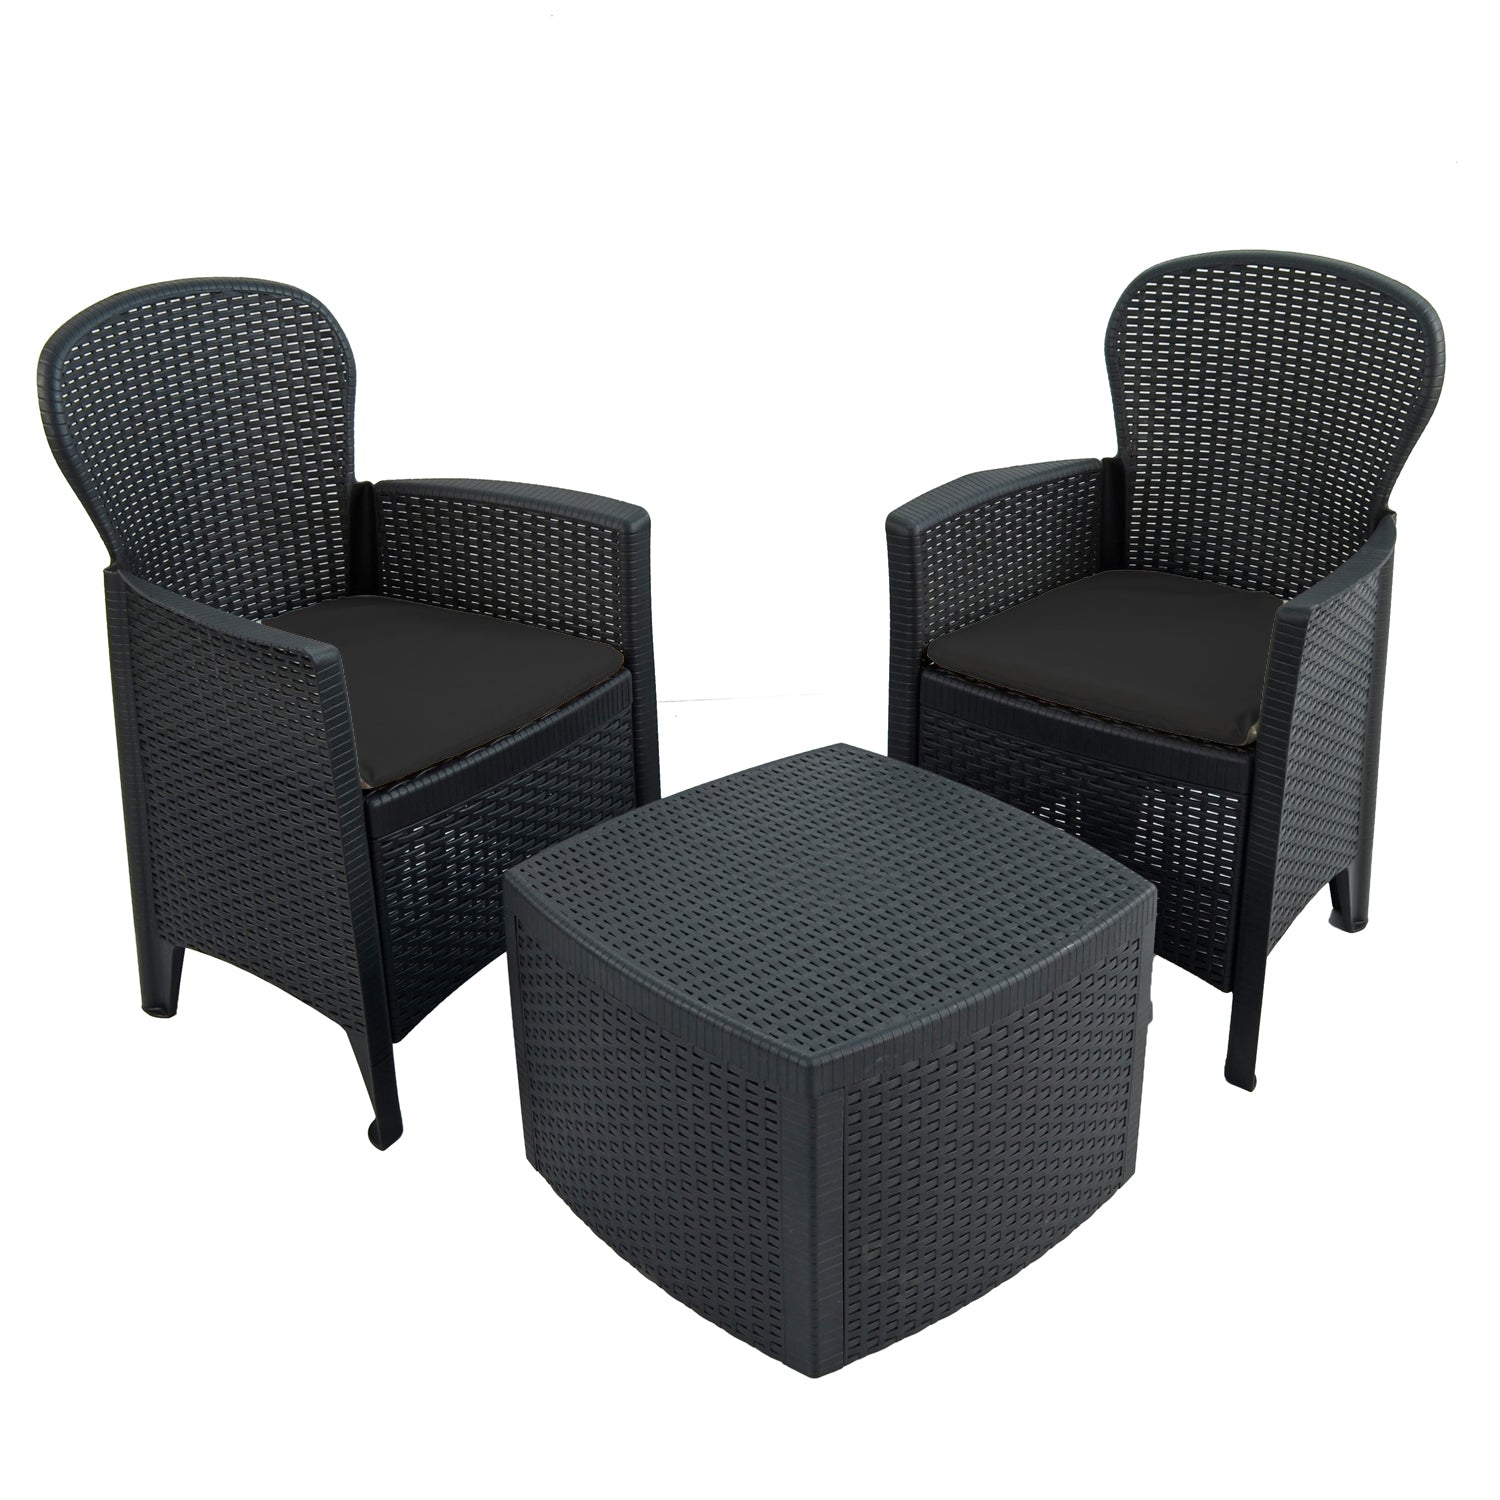 Trabella Sicily Side Table with 2 Sicily Chairs Set Anthracite Dining Sets Trabella   